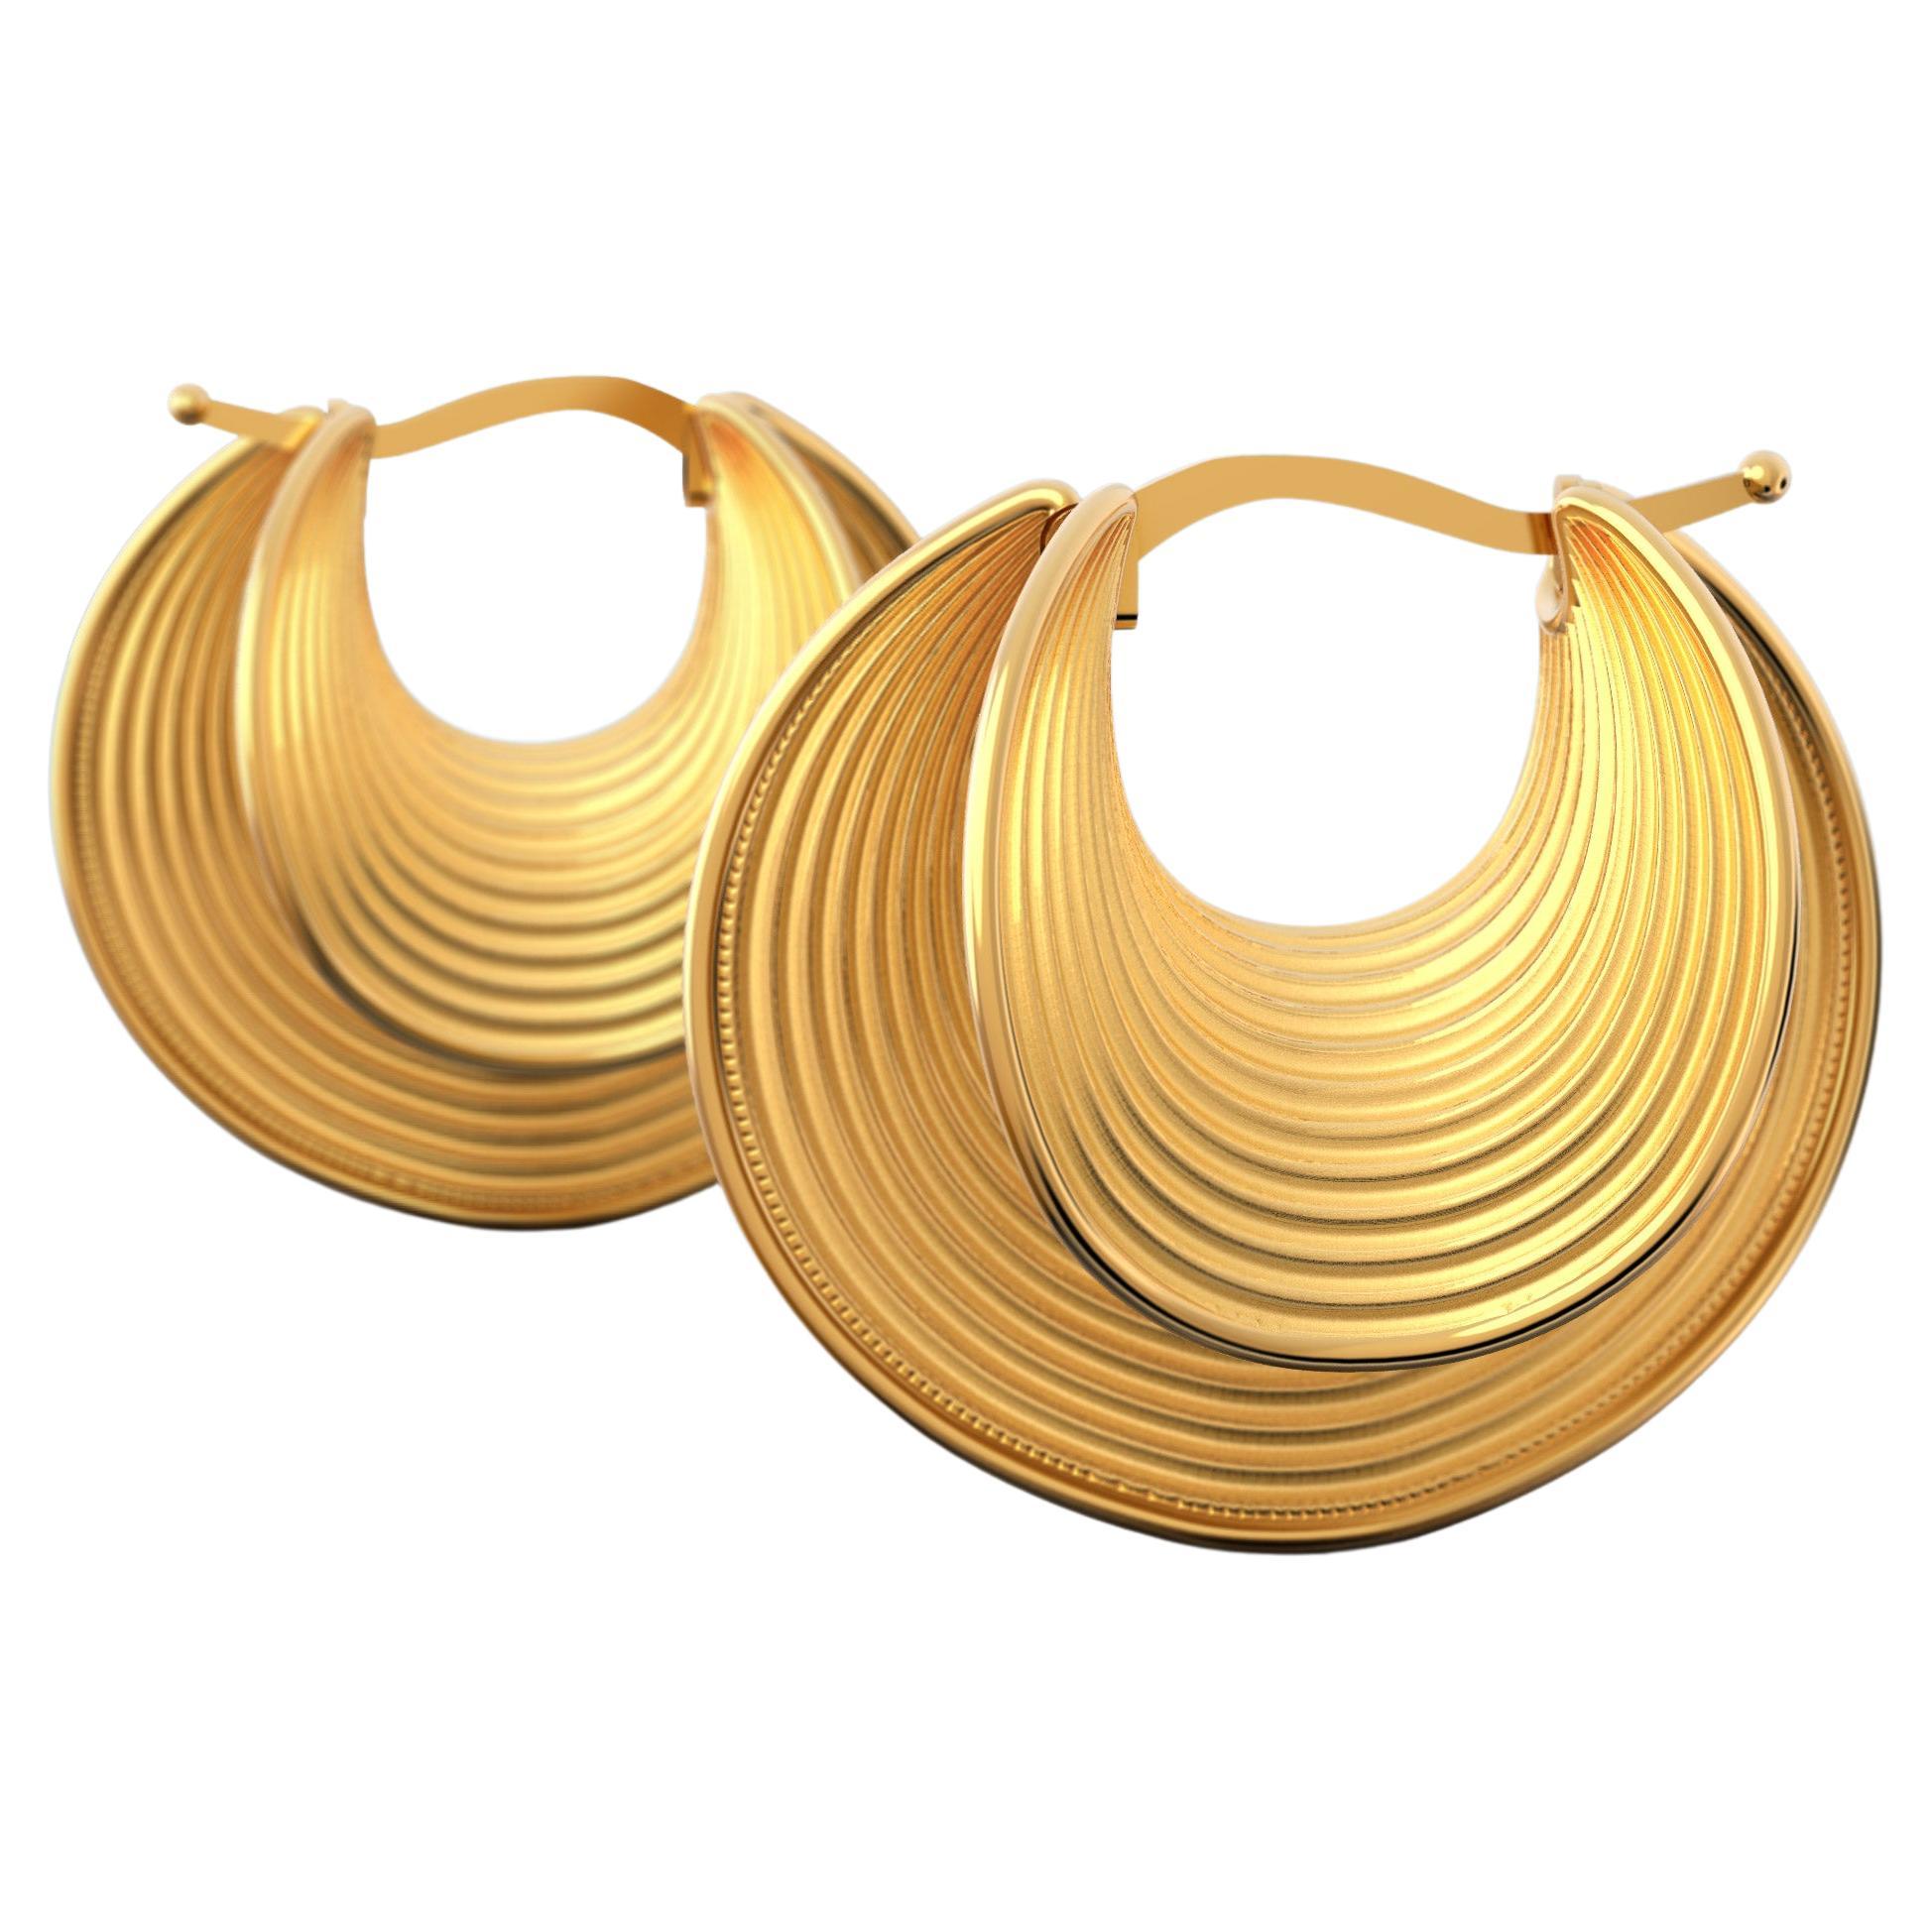 27 mm diameter beautiful hoop earrings crafted in polished and raw solid gold 14k 
Available in yellow gold, rose gold and white gold, 14k or 18k on request.
The earrings are secured by a trusty snap closure.
The approximate total weight is 10 grams